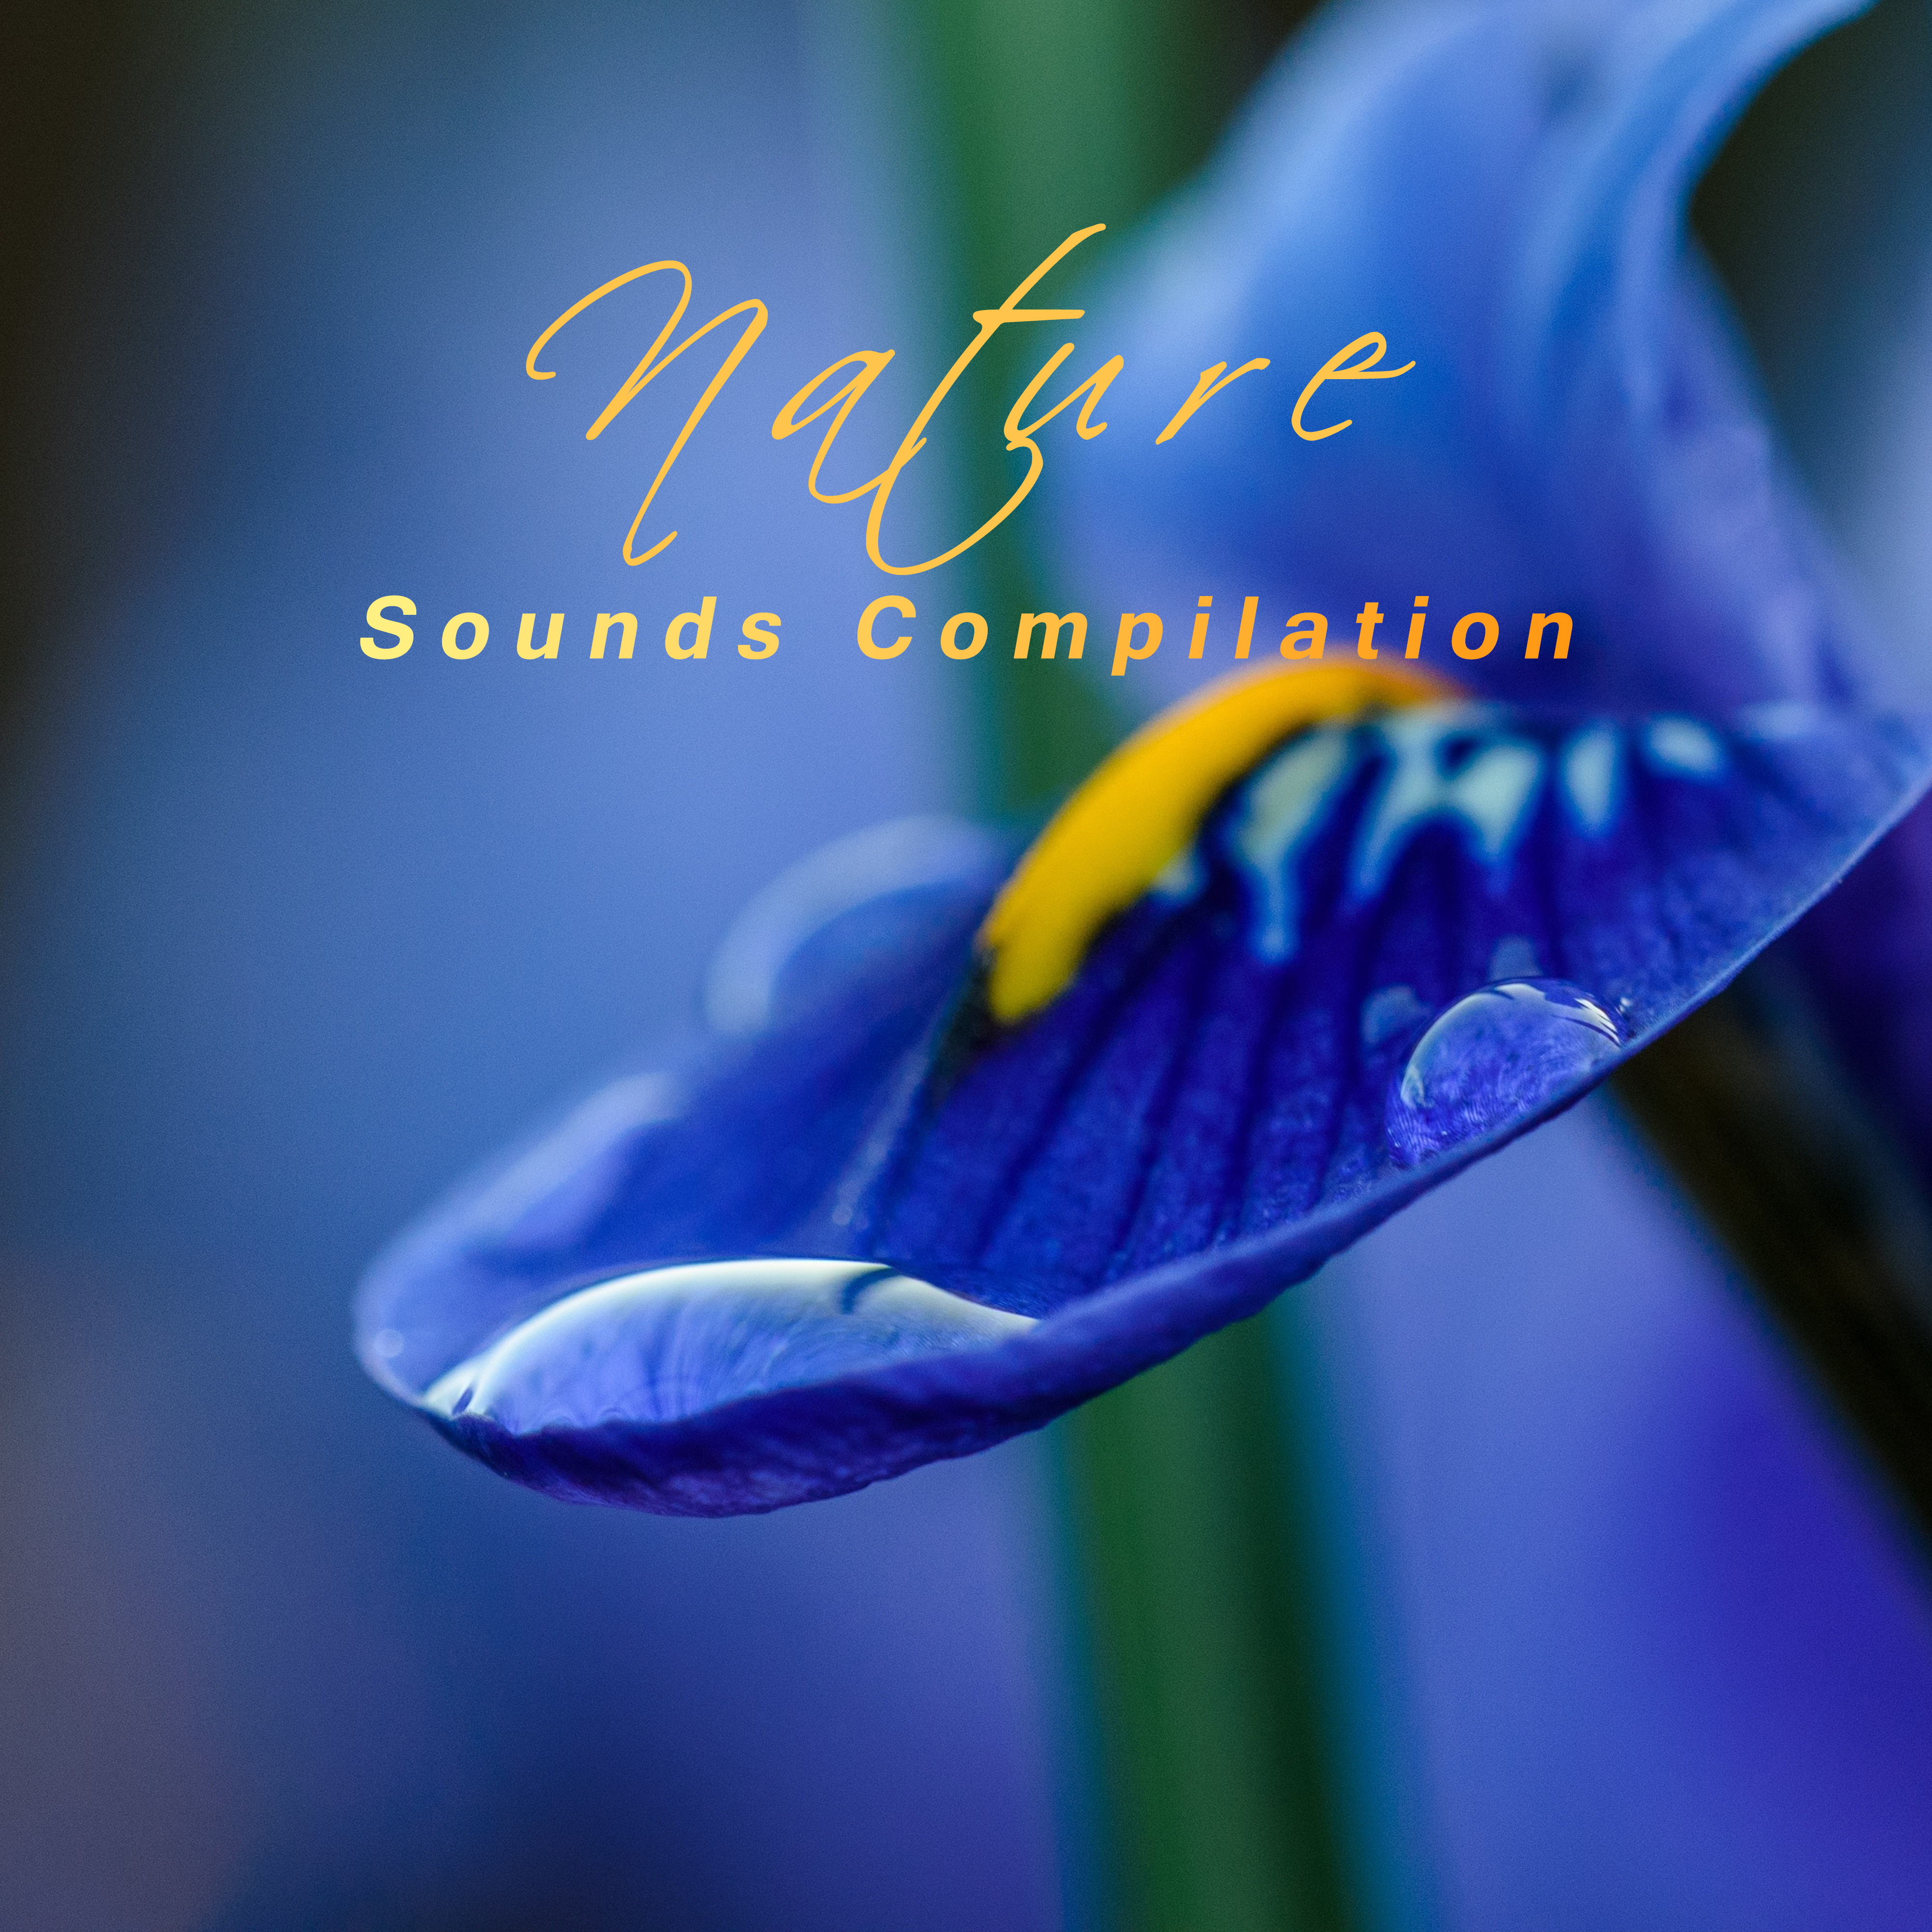 Nature Sounds Compilation – Relaxing Music Therapy, Sounds of Nature, Relaxation & Meditation, Zen